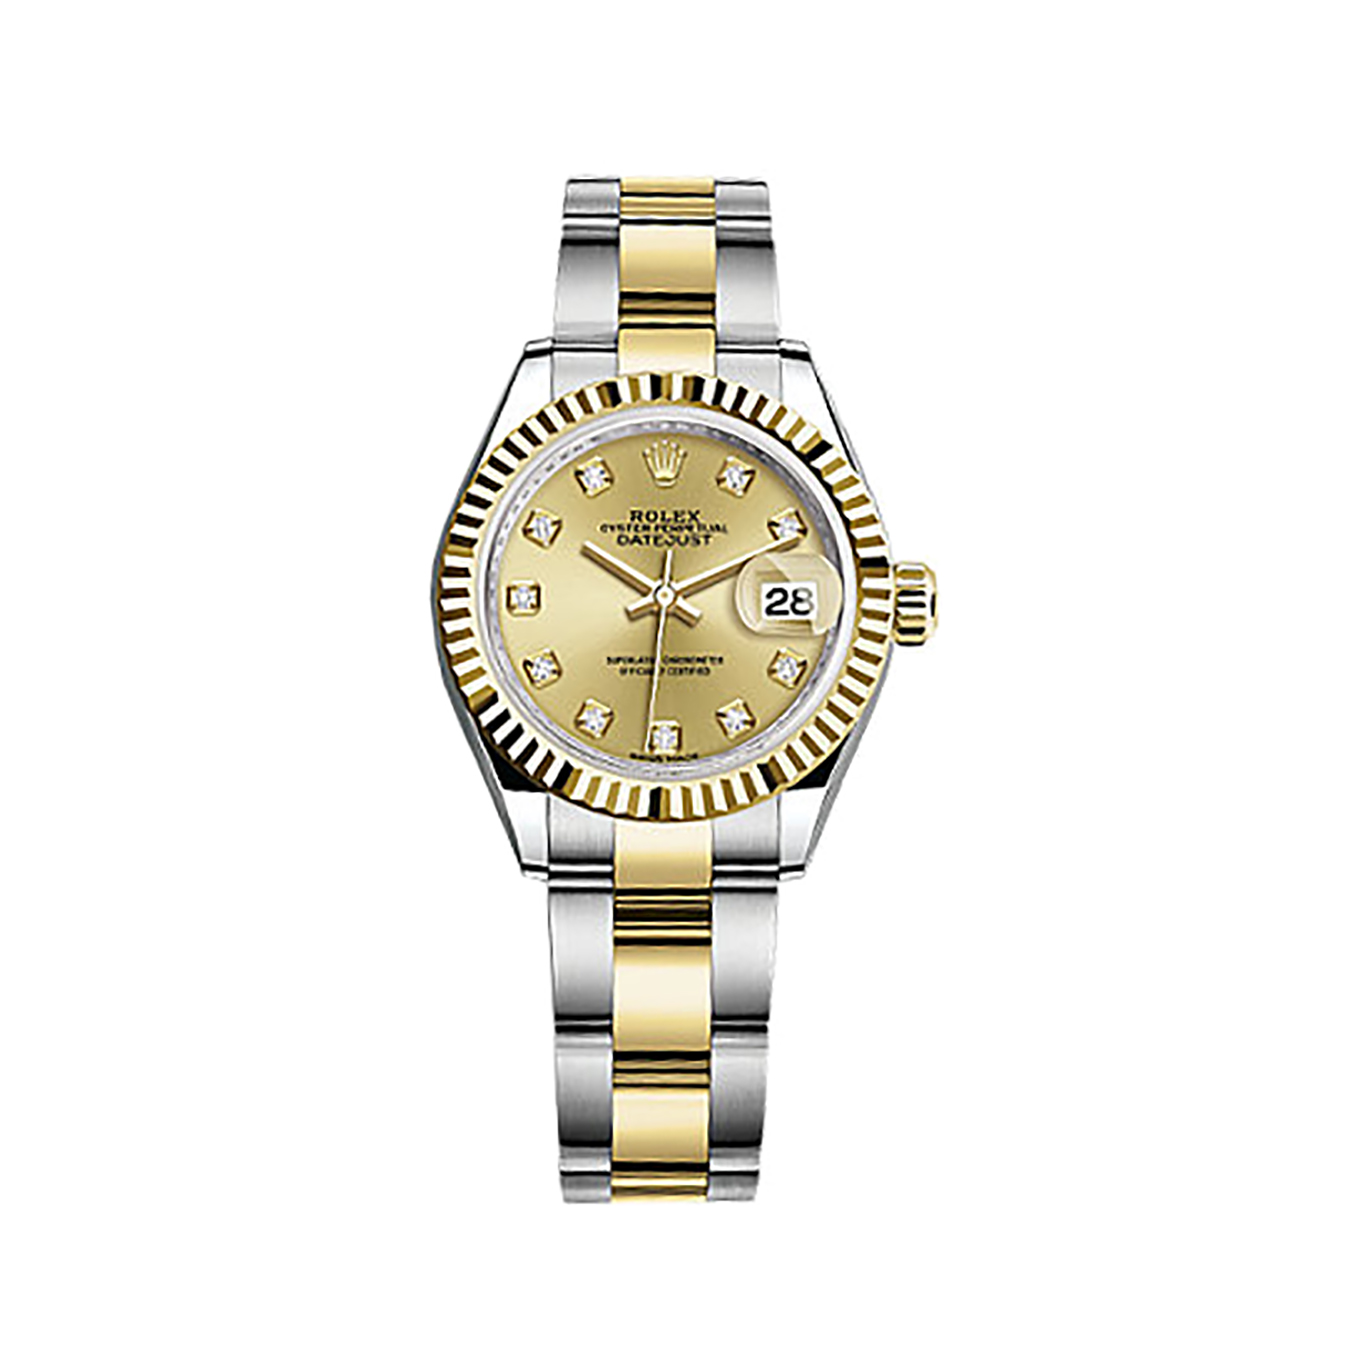 Lady-Datejust 28 279173 Gold & Stainless Steel Watch (Champagne Set with Diamonds) - Click Image to Close